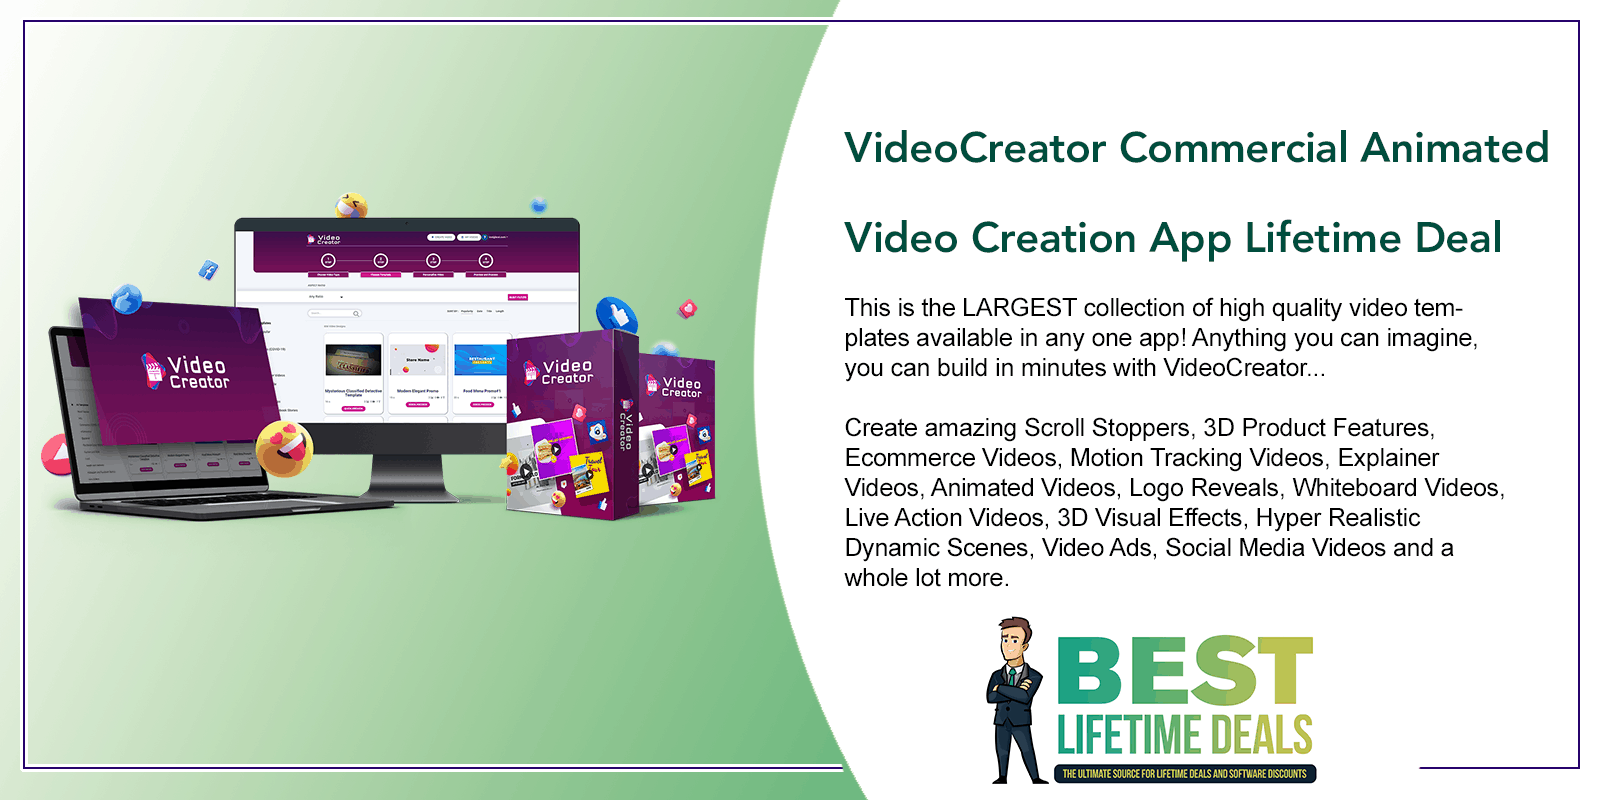 VideoCreator Commercial Animated Video Creation App Featured Image